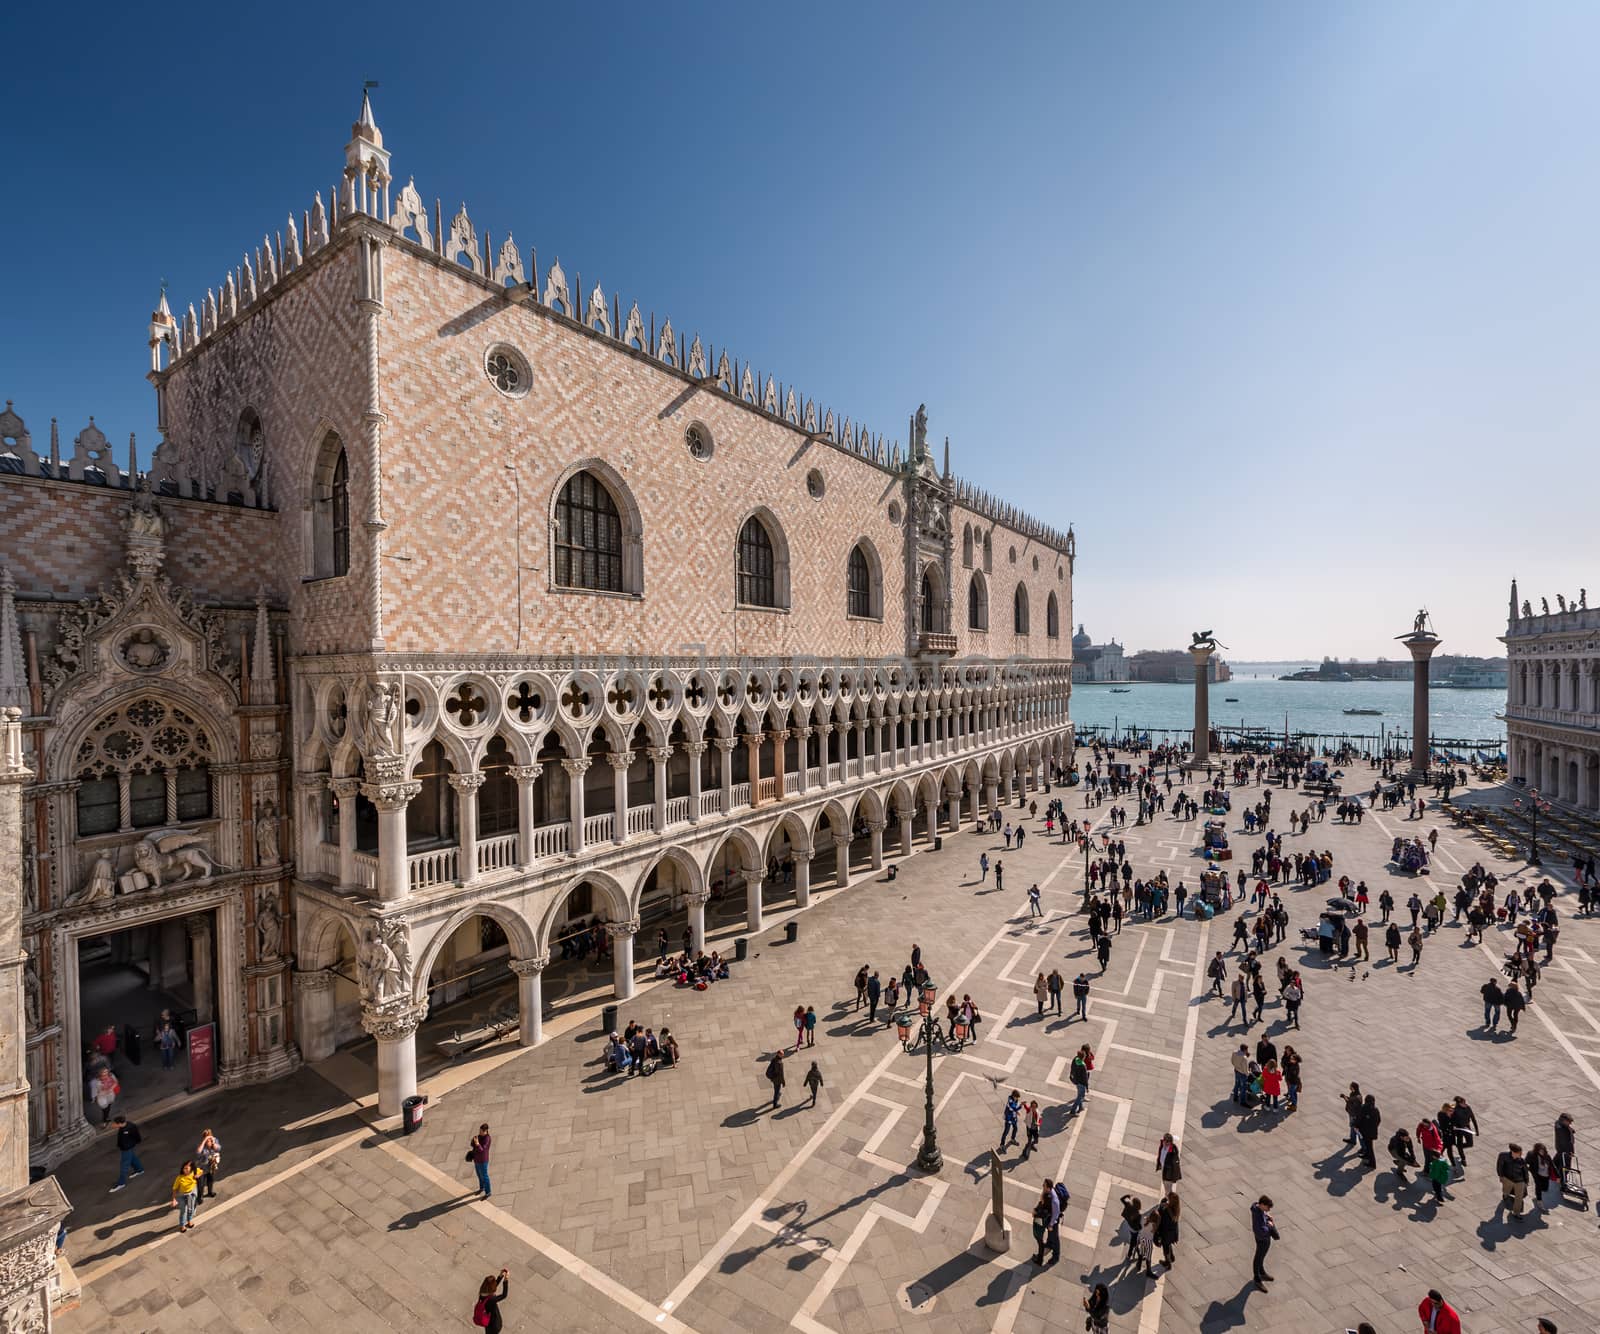 VENICE, ITALY - MARCH 8: Doge's Palace on March 8, 2014 in Venice, Italy. Formerly the residence of the Doge and now a museum, the palace is one of the main landmarks of the city.